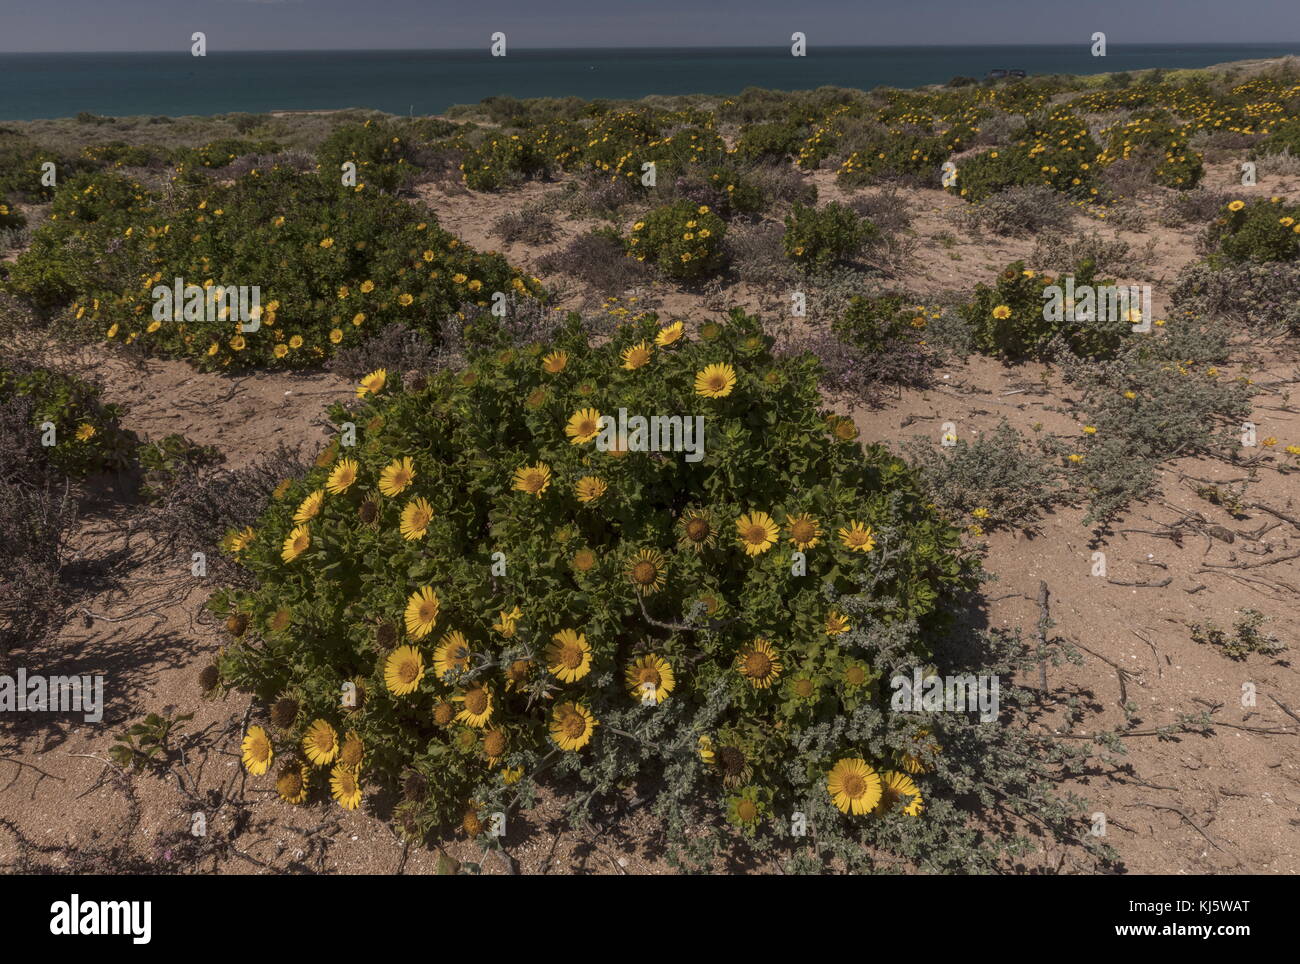 Moroccan Yellow Sea Daisy, Asteriscus imbricatus, in flower in coastal habitat, south-west Morocco. Stock Photo